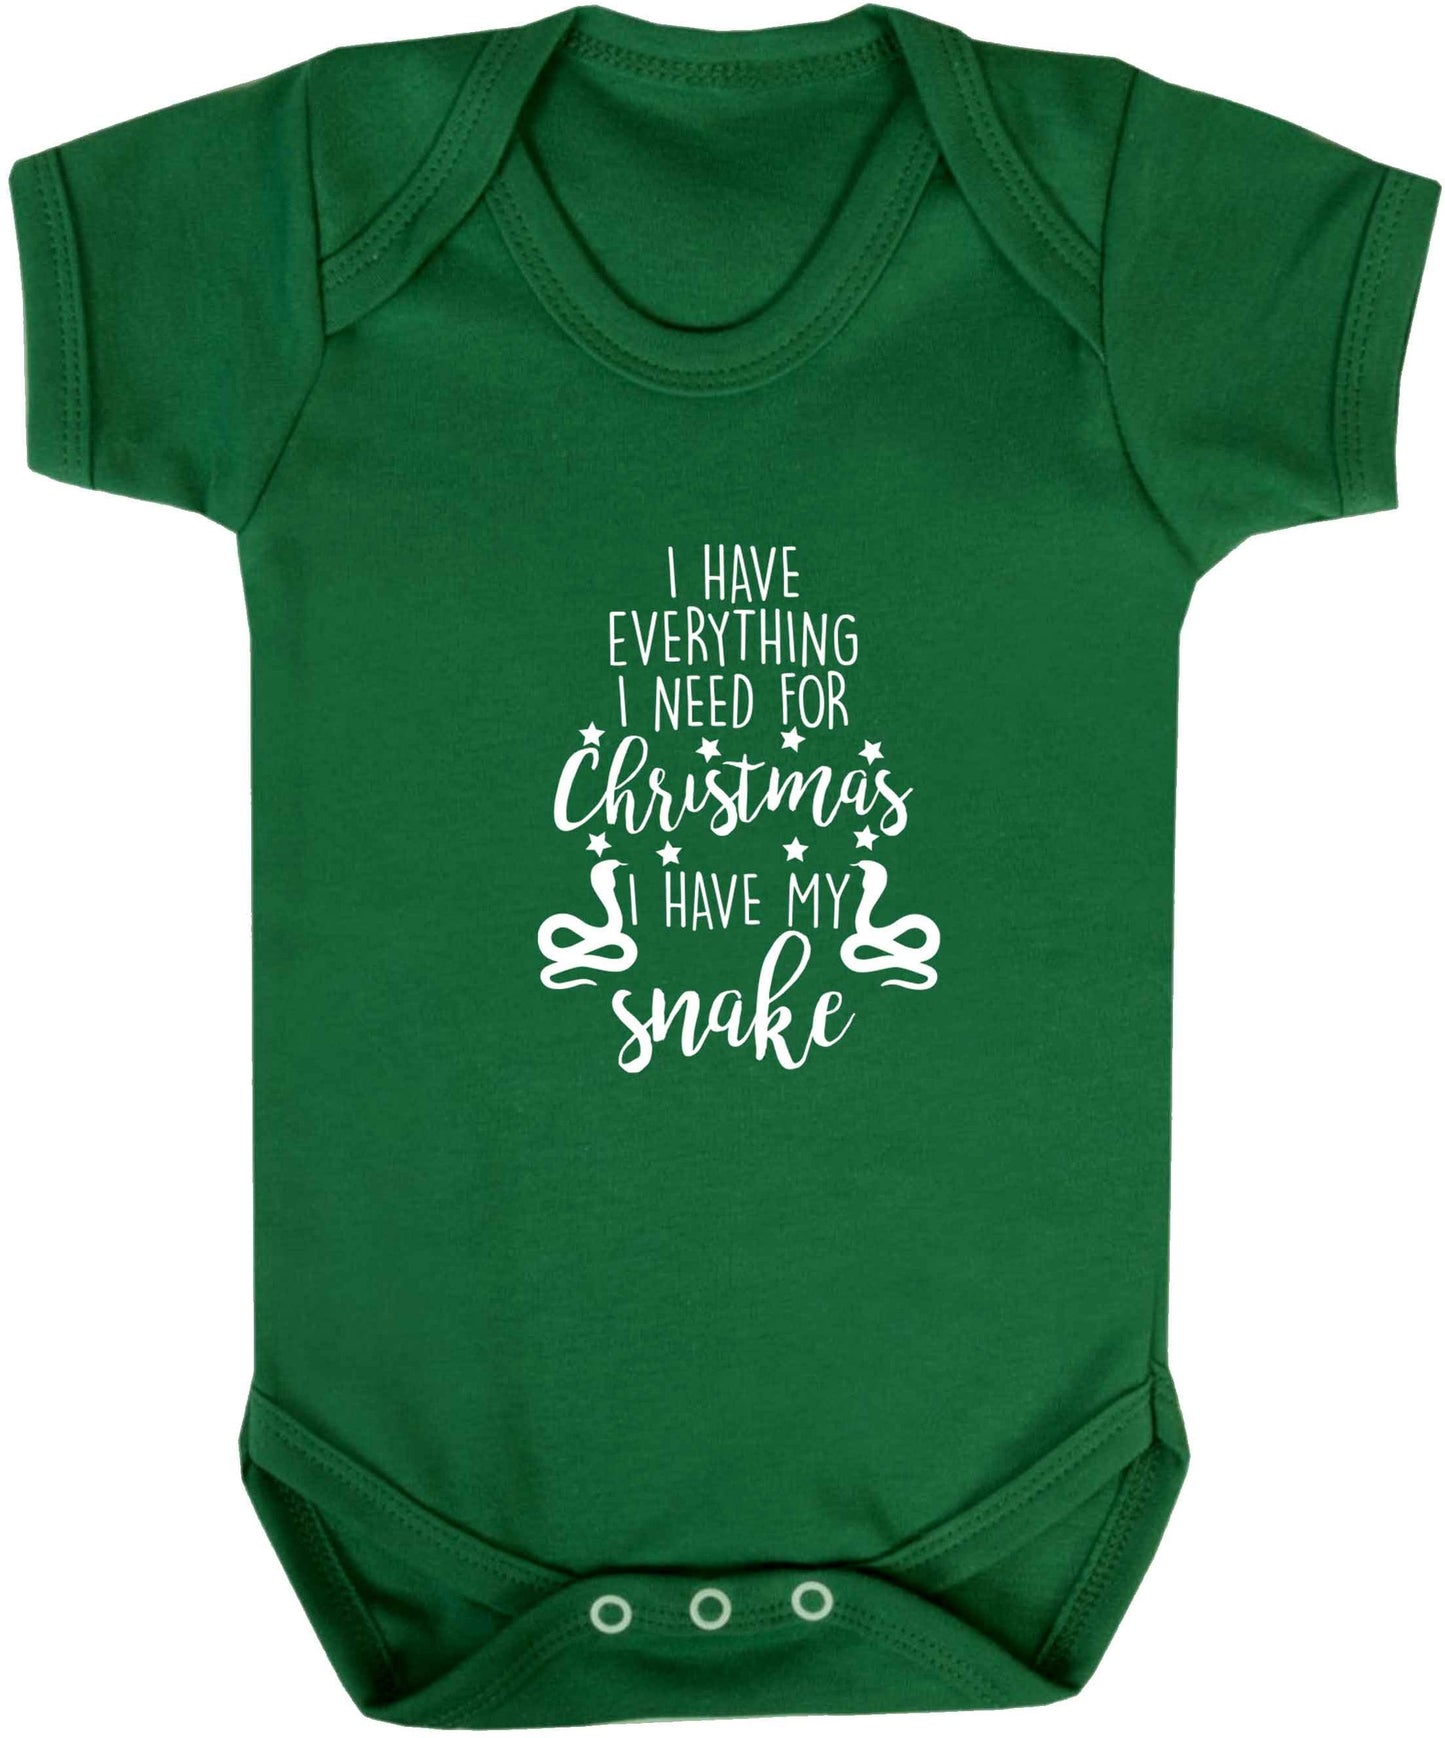 I have everything I need for Christmas I have my snake baby vest green 18-24 months